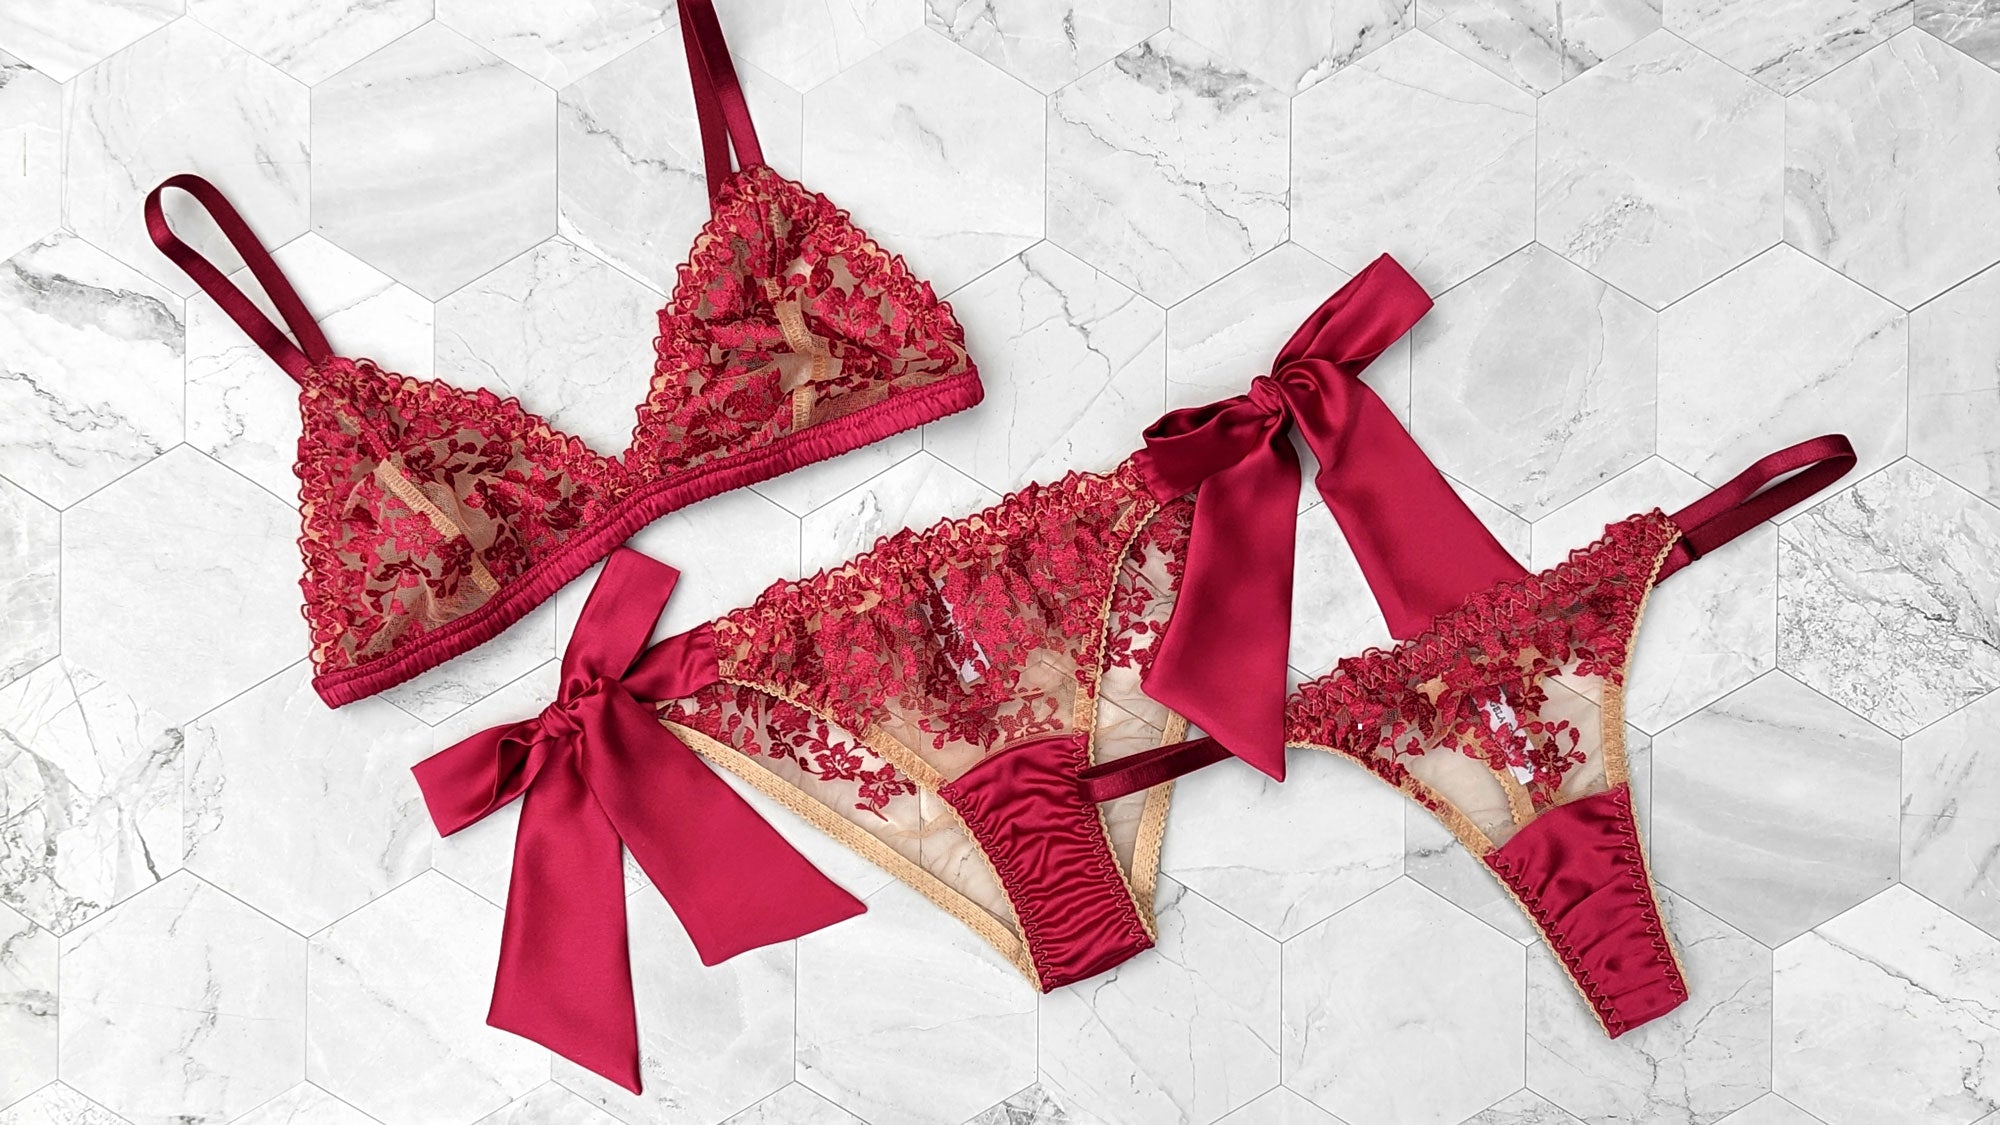 Red Valentine's Day lingerie set with a lace bralette, side tie knickers, and silk thong